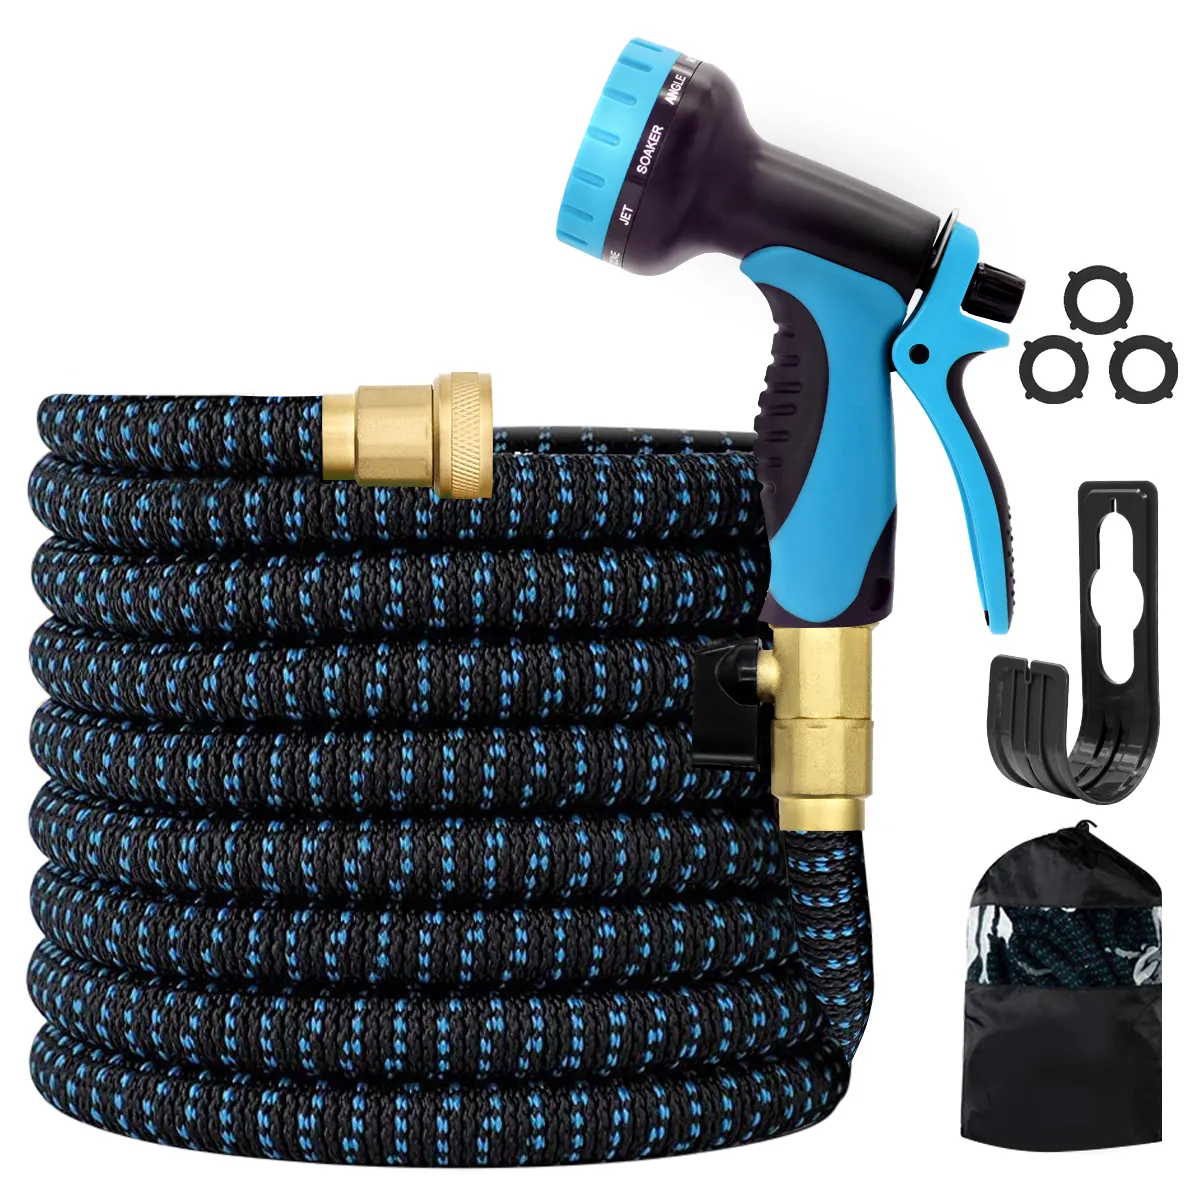 50ft Expandable Garden Hose with 10 Function Nozzle, Lightweight Retractable Water Hose with Solid Brass Fittings